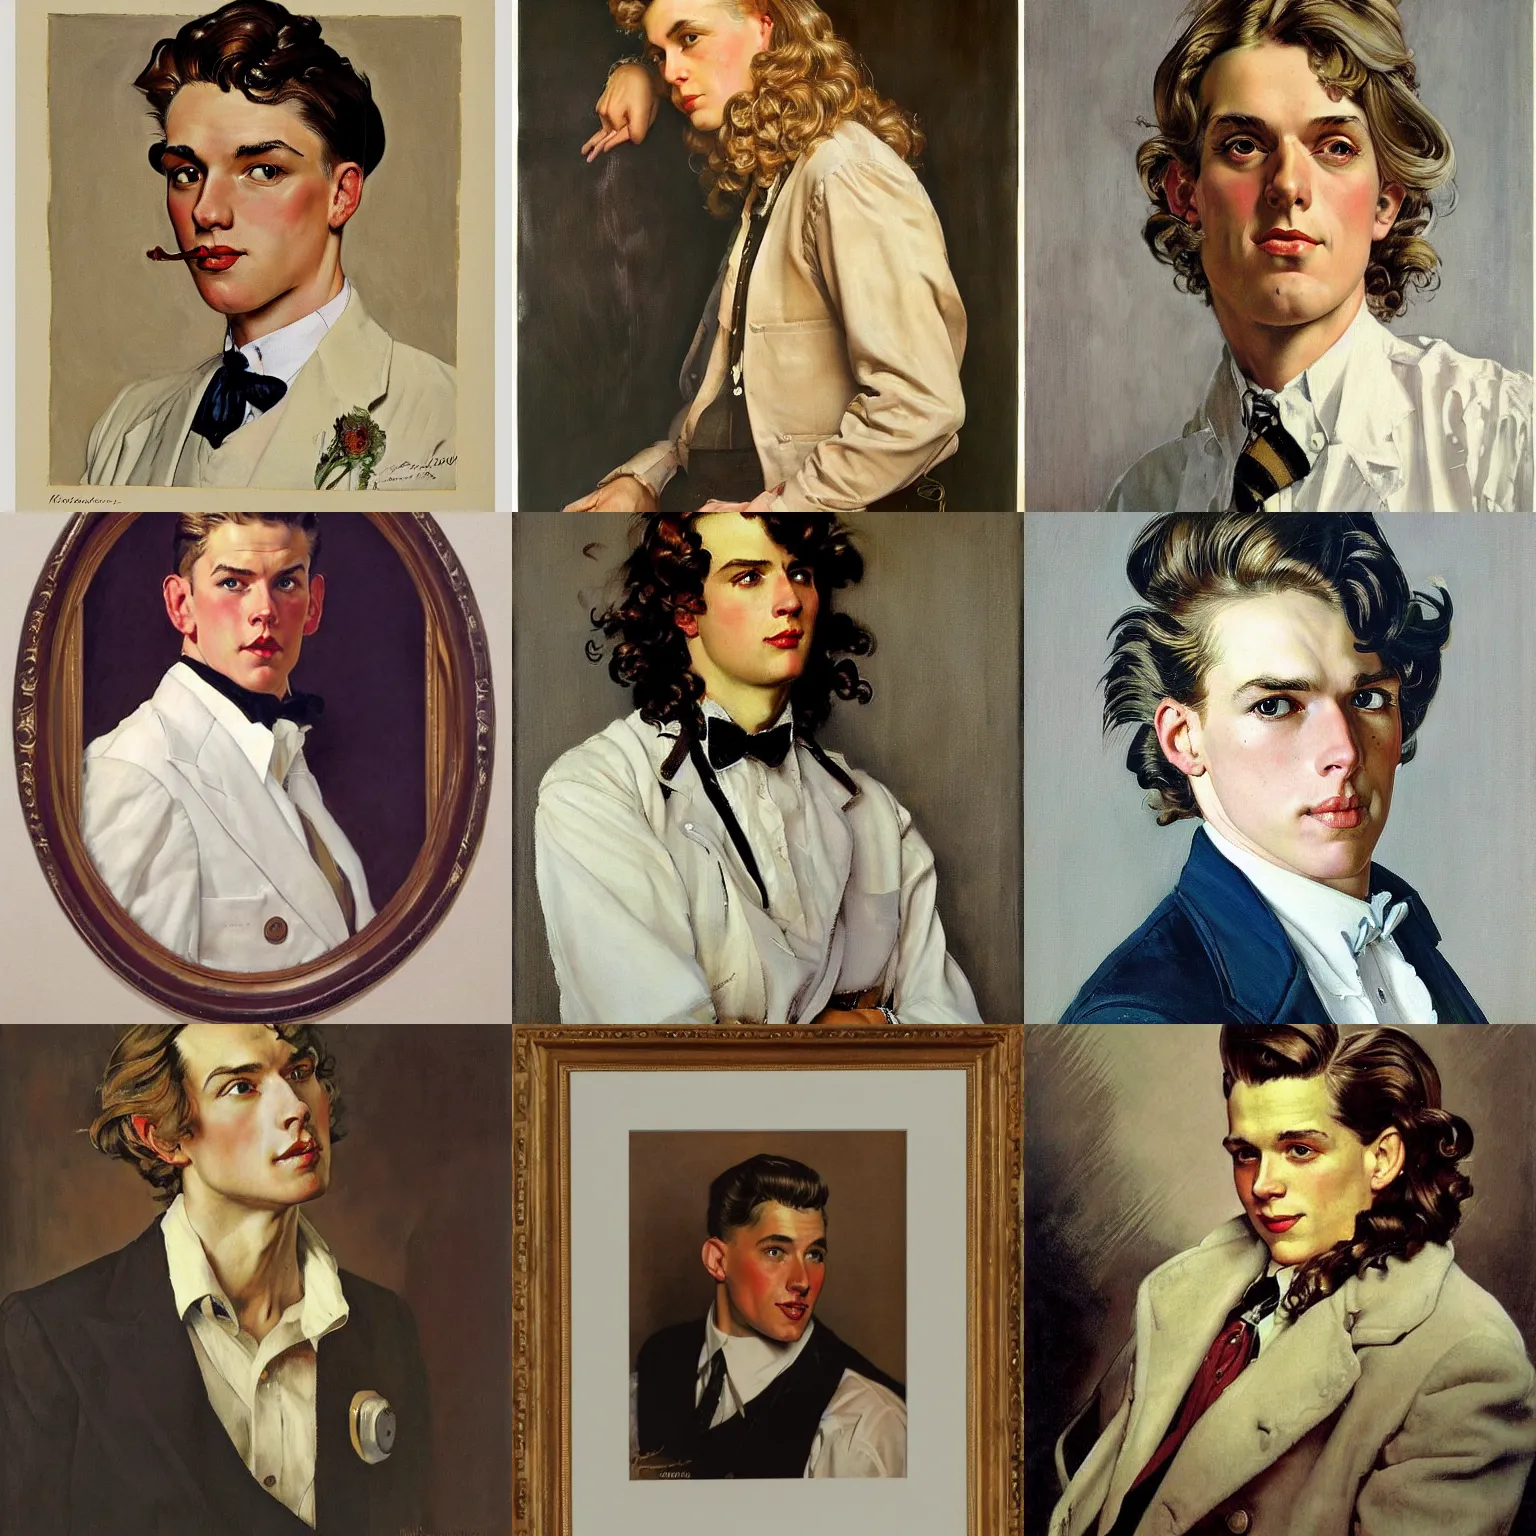 Prompt: Painting of Dominik Sadoch with long fluffy curly blond hair. By J.C Leyendecker and Norman Rockwell. Androgynous clean shaven scandinavian white man.